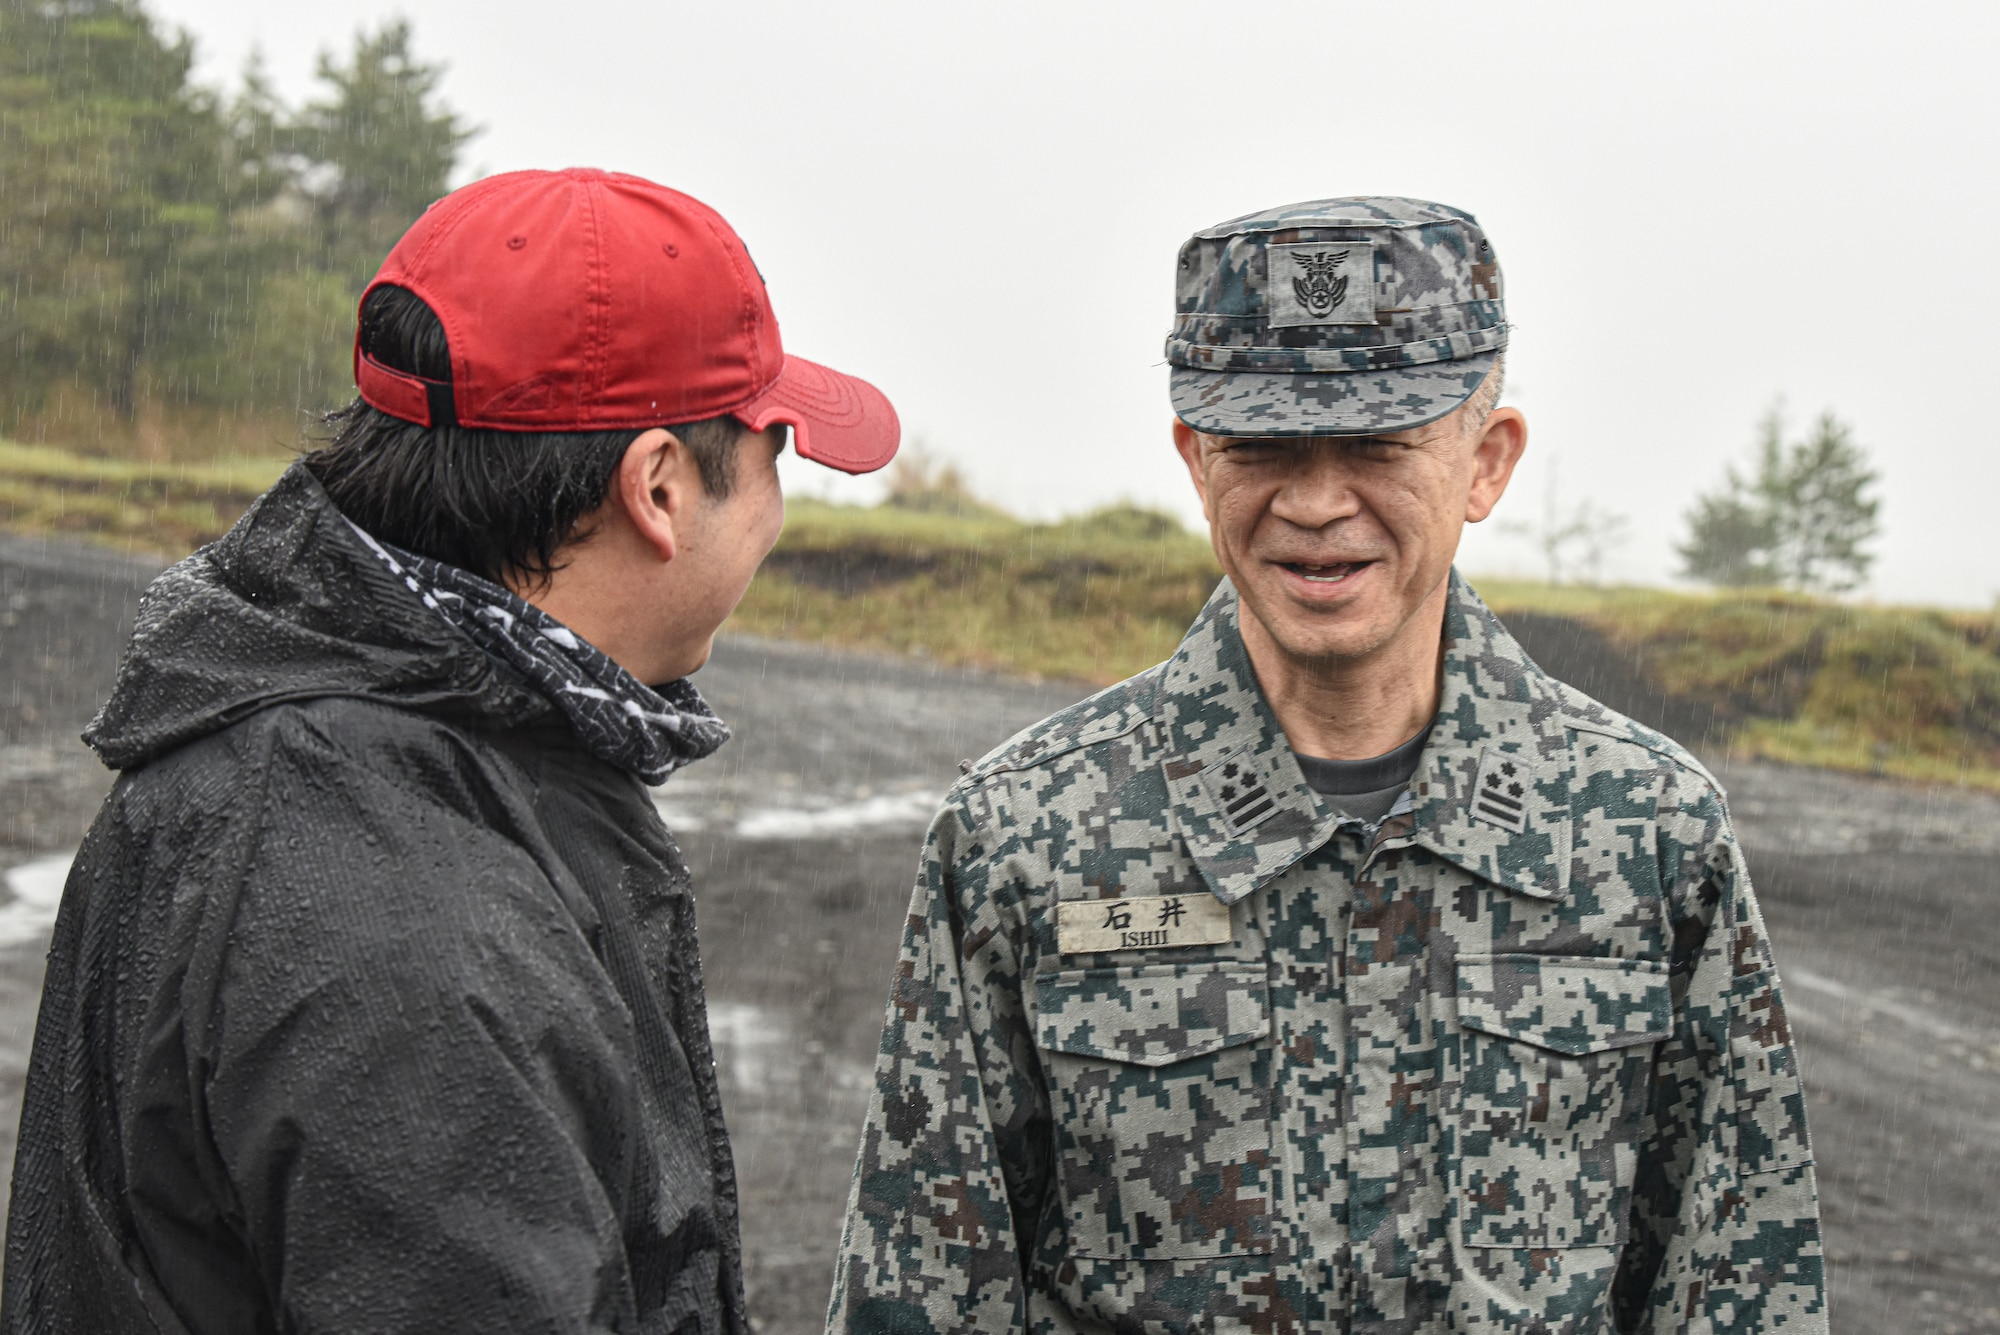 A Japan Air Self-Defense Force servicemember speaks with a weapons instructor.